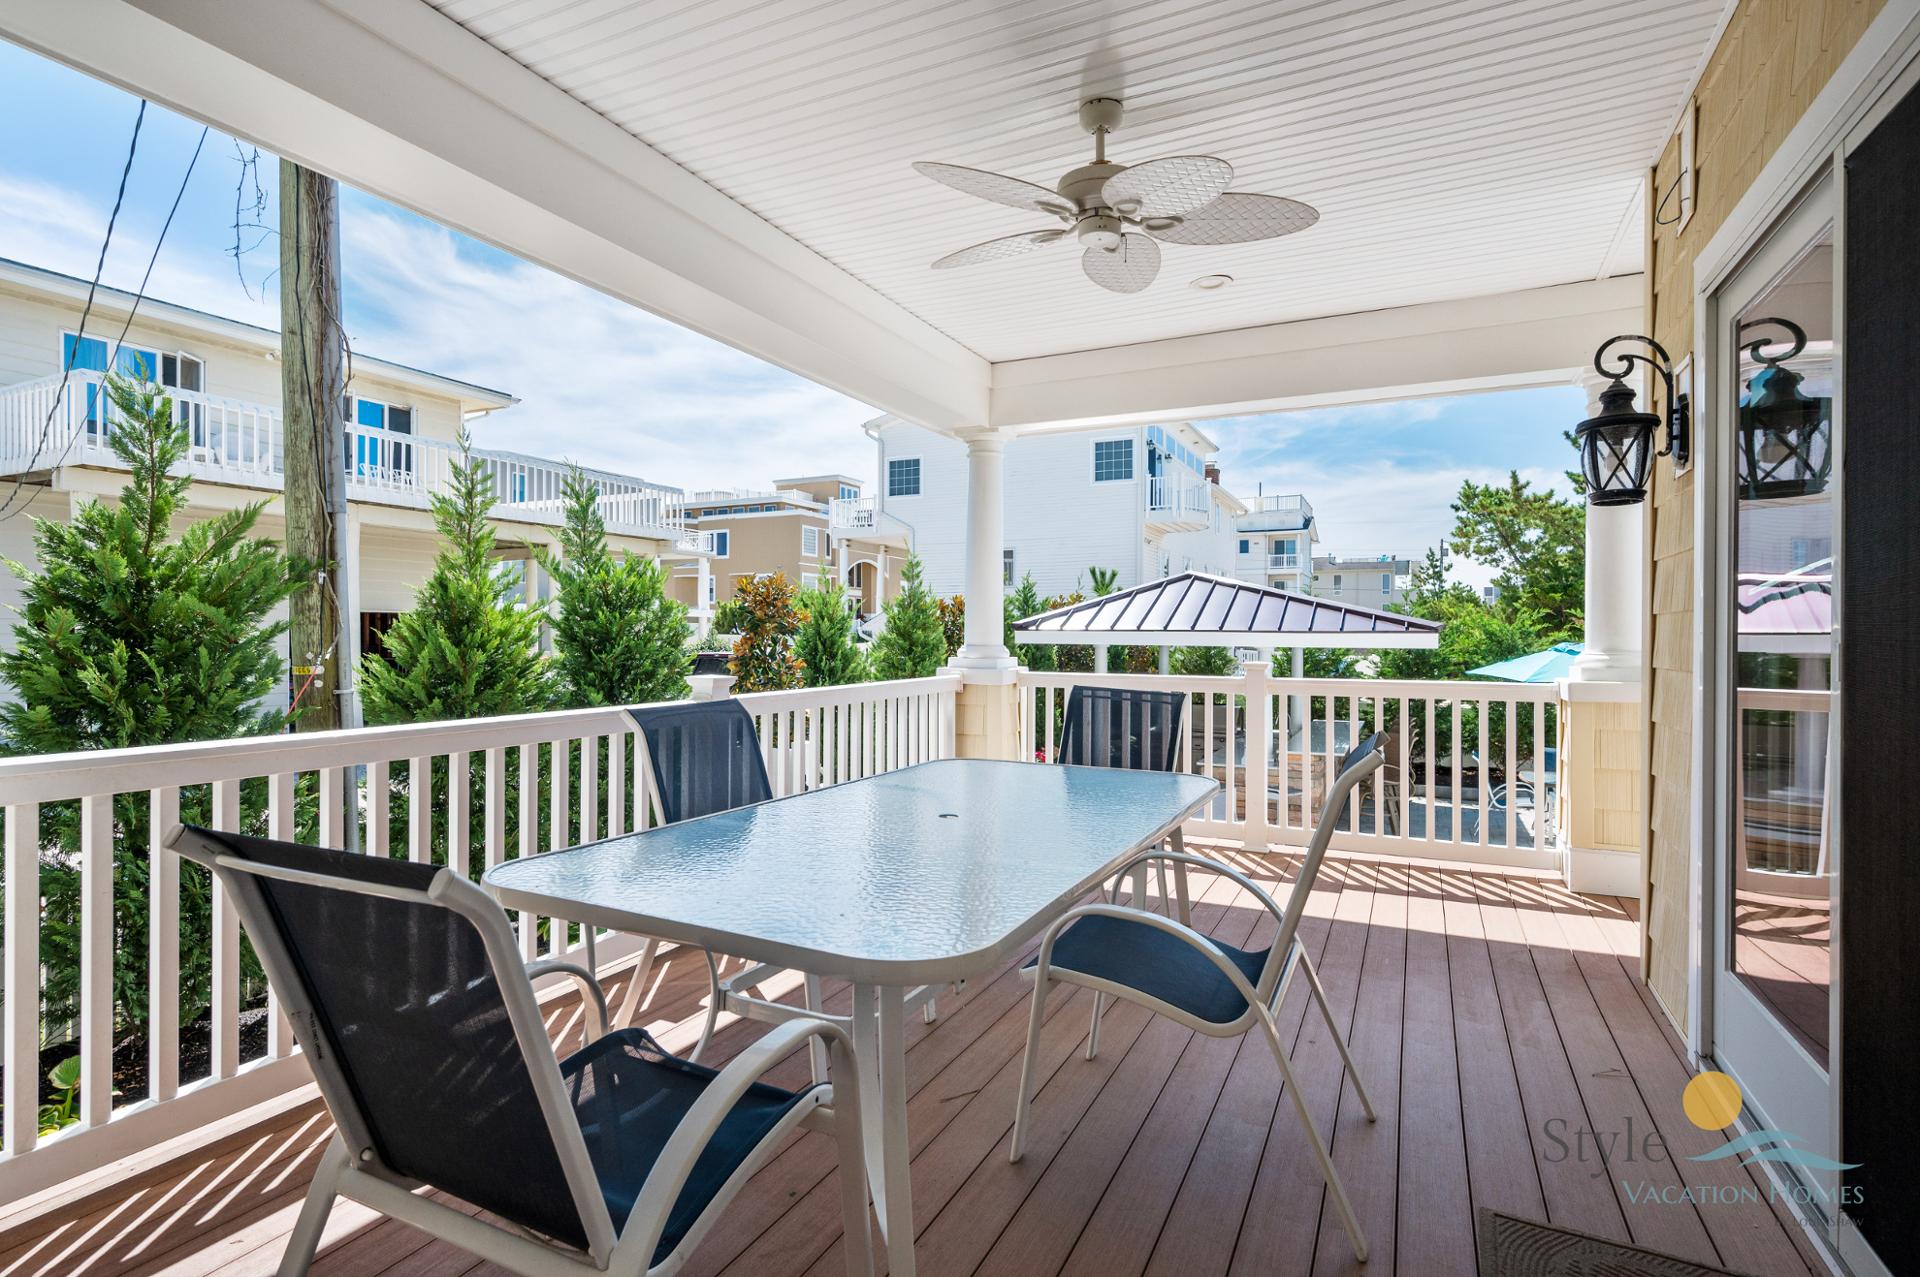 Vacation rental in Barneget Light New Jersey